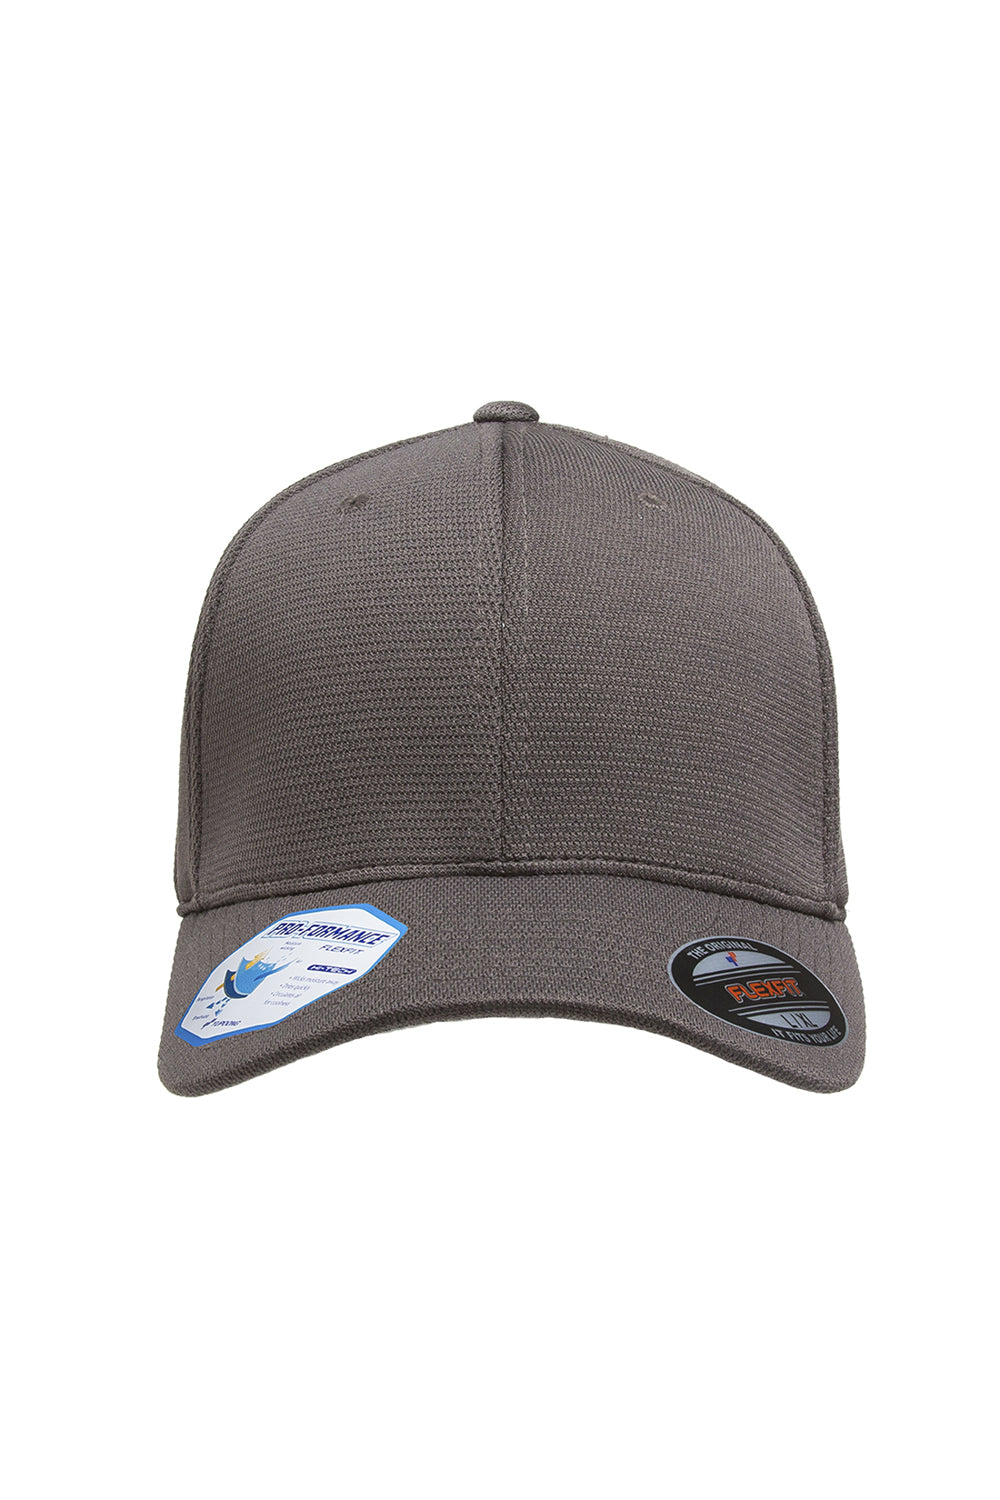 Flexfit 6597 Mens Grey Cool & Dry Moisture Wicking Stretch Fit Hat